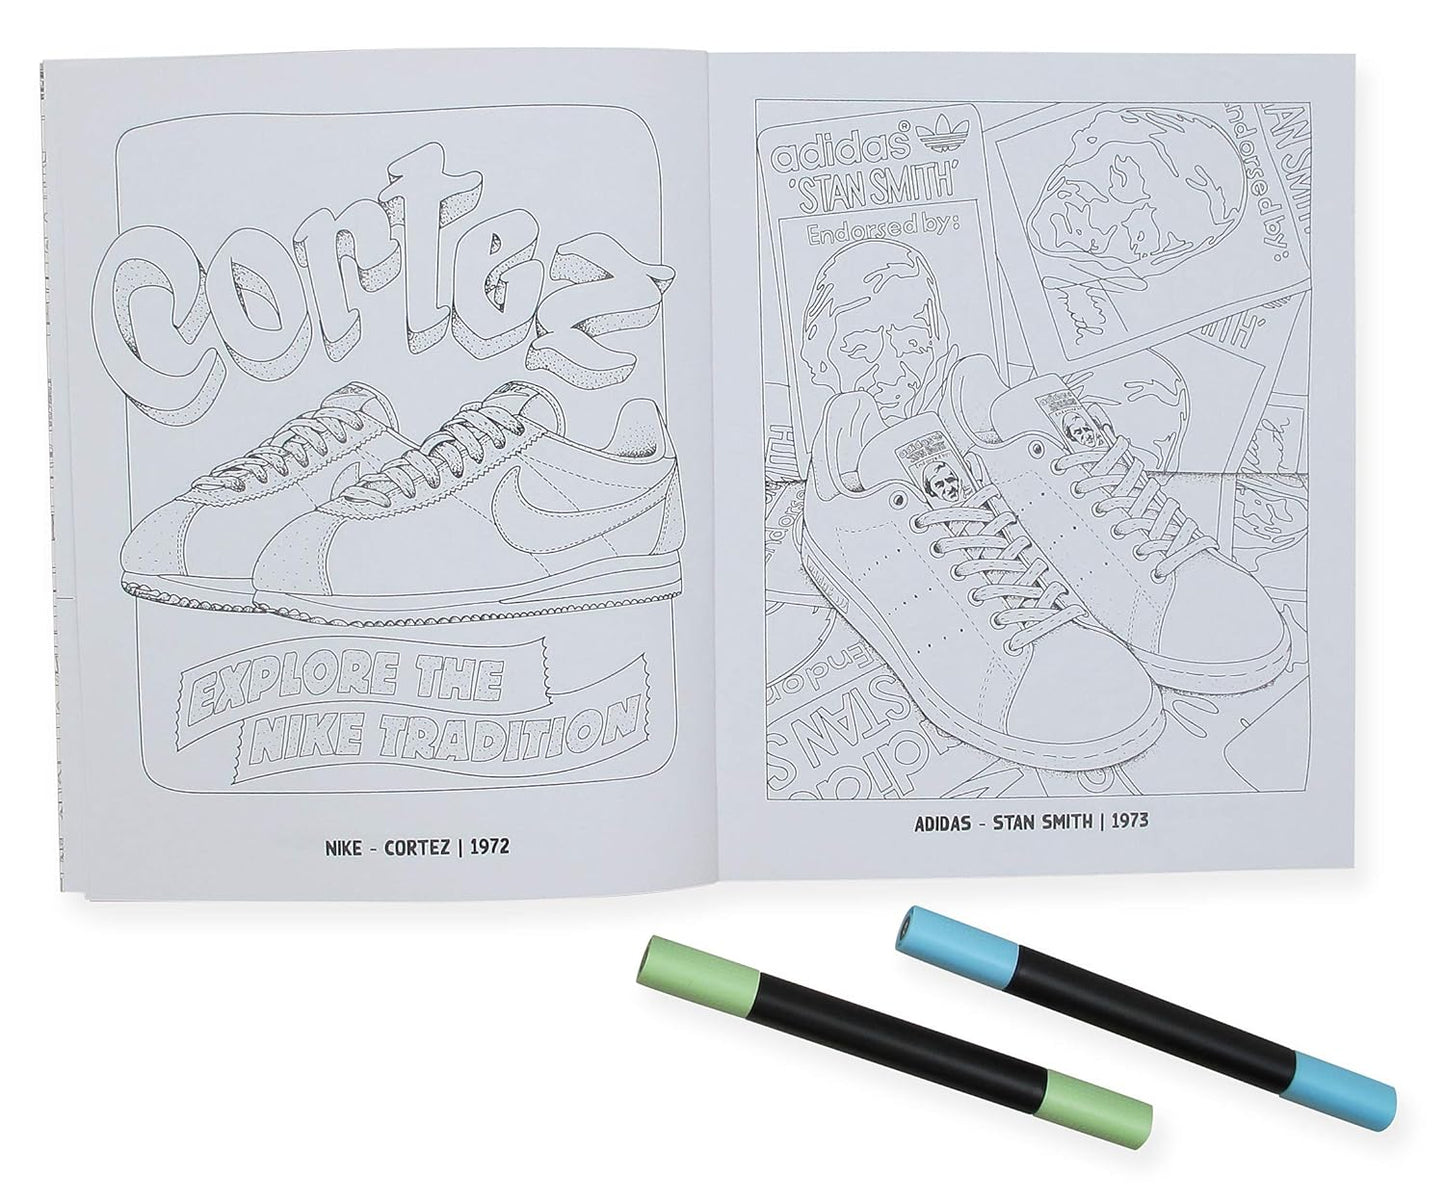 Sneaker Coloring Book: 46 Iconic Models